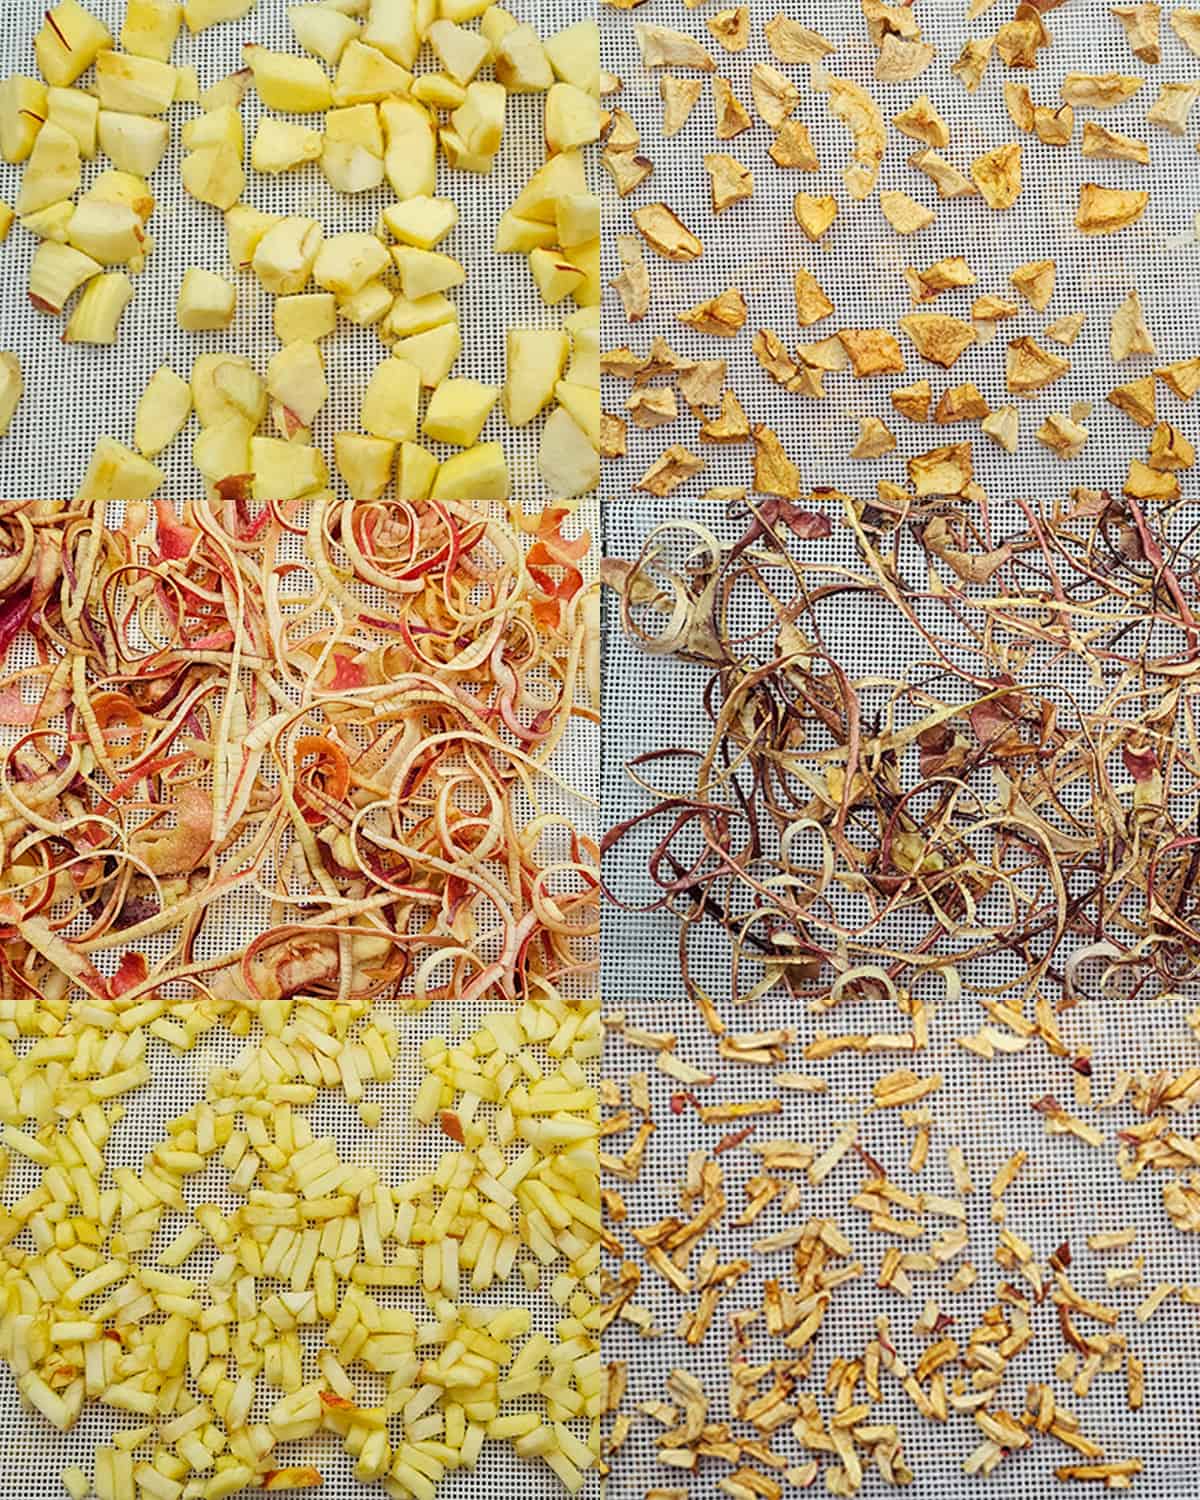 A collage of 3 other ways to dehydrate apples.